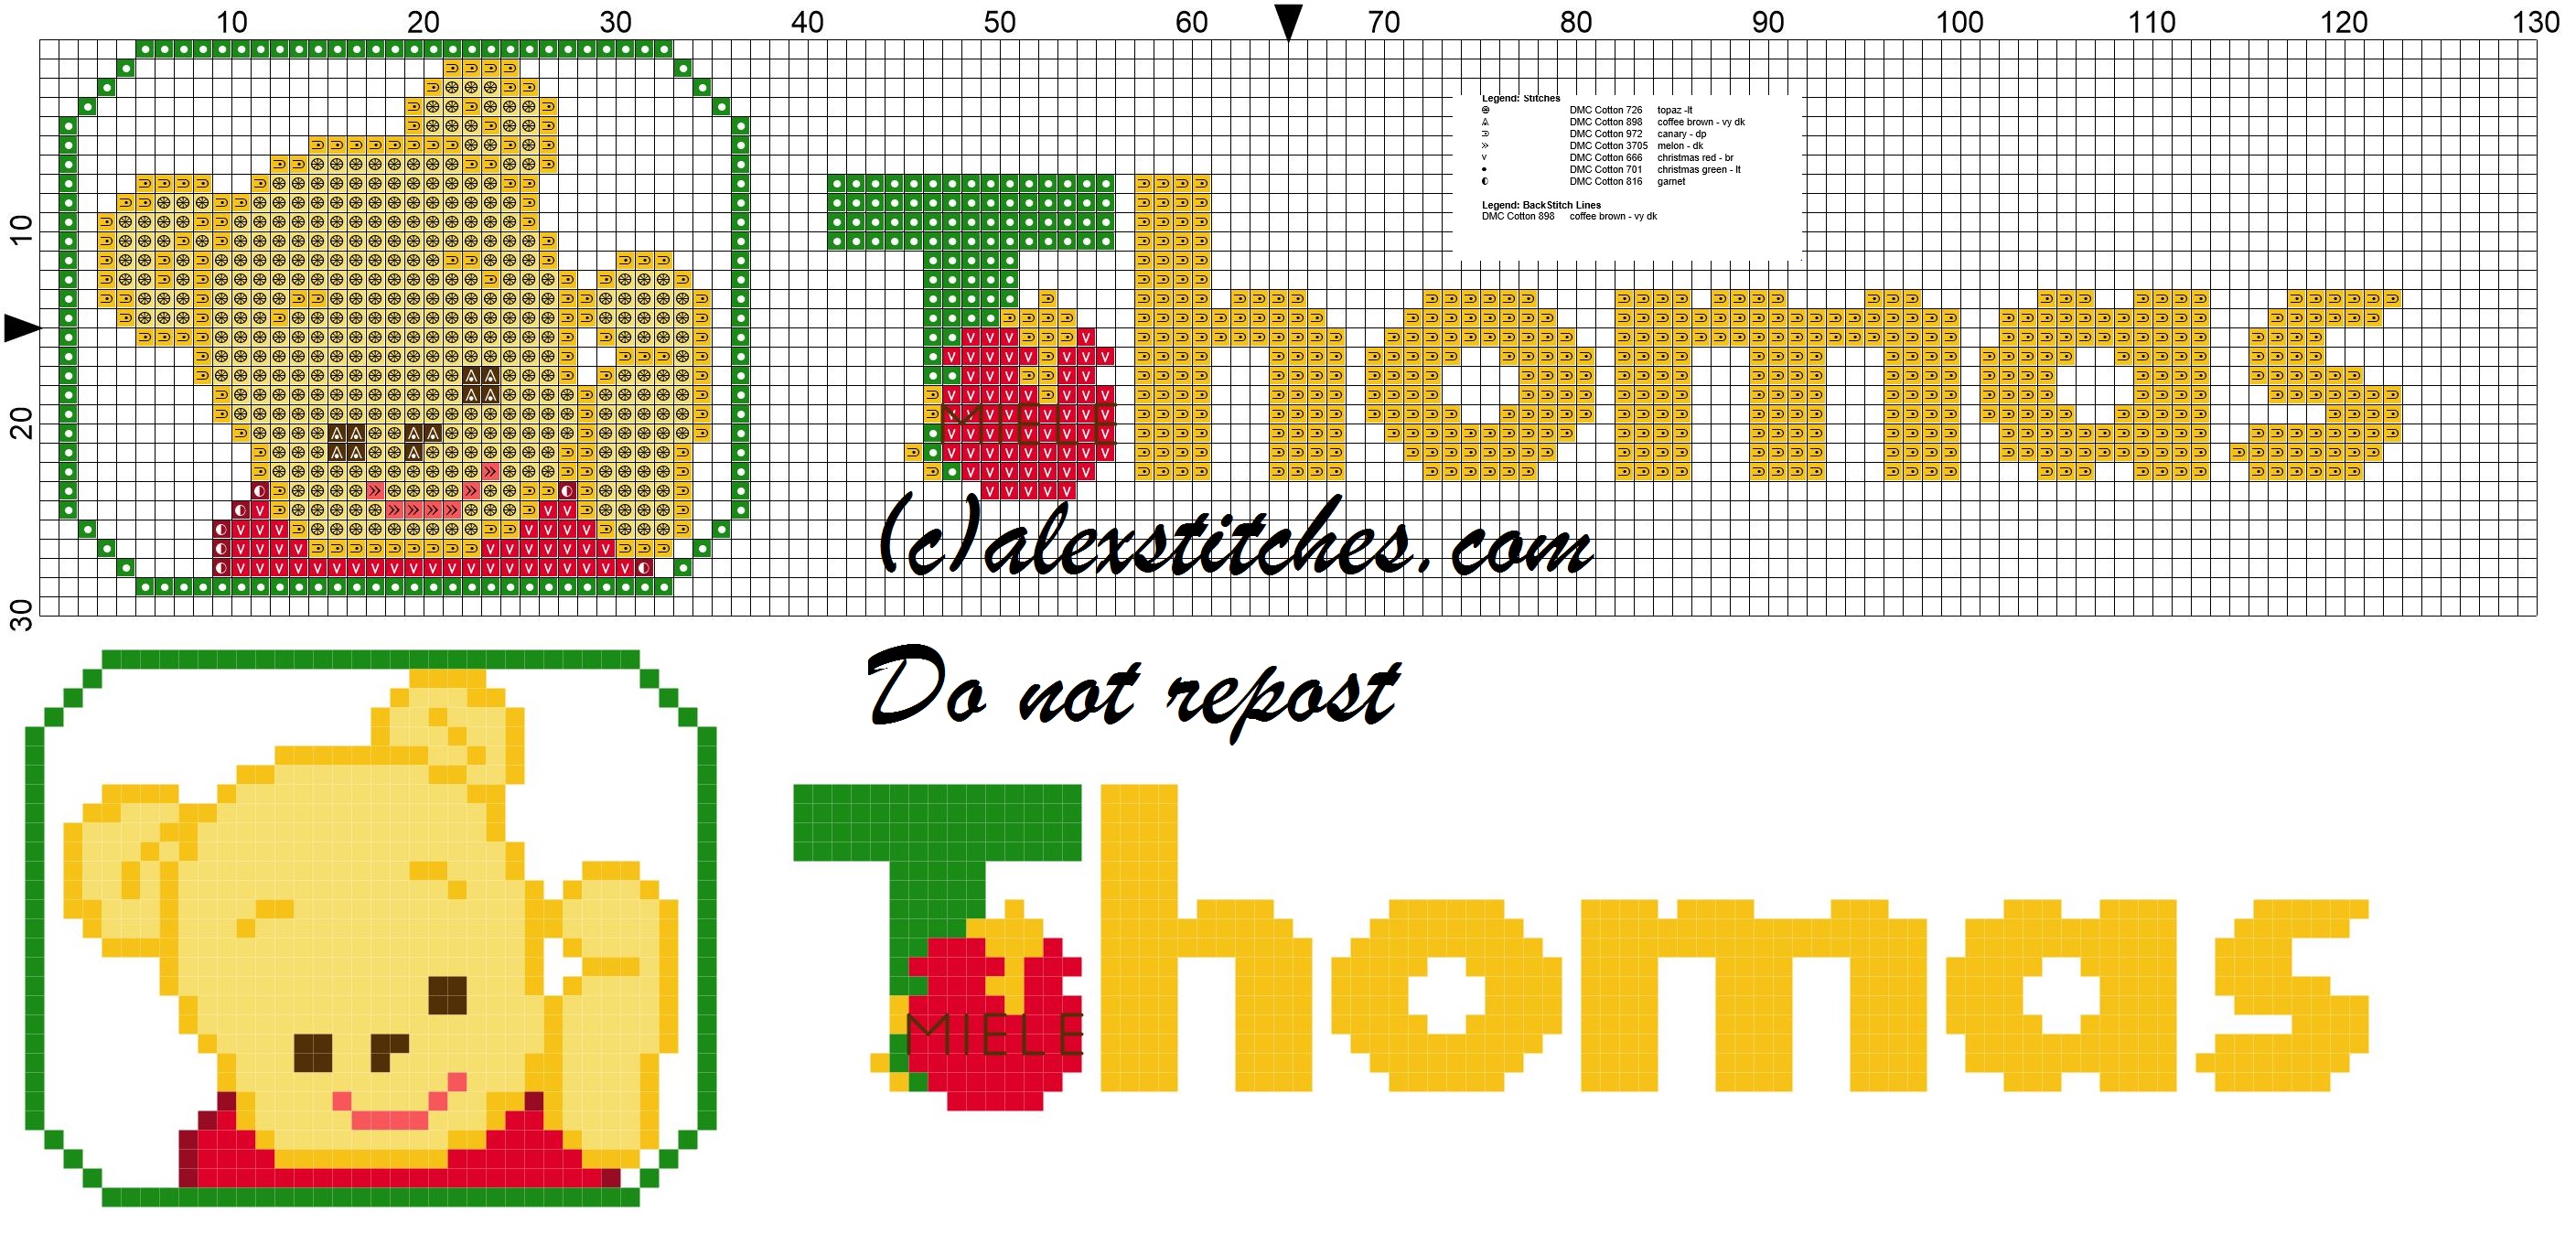 Thomas name with Baby winnie the pooh free cross stitches pattern